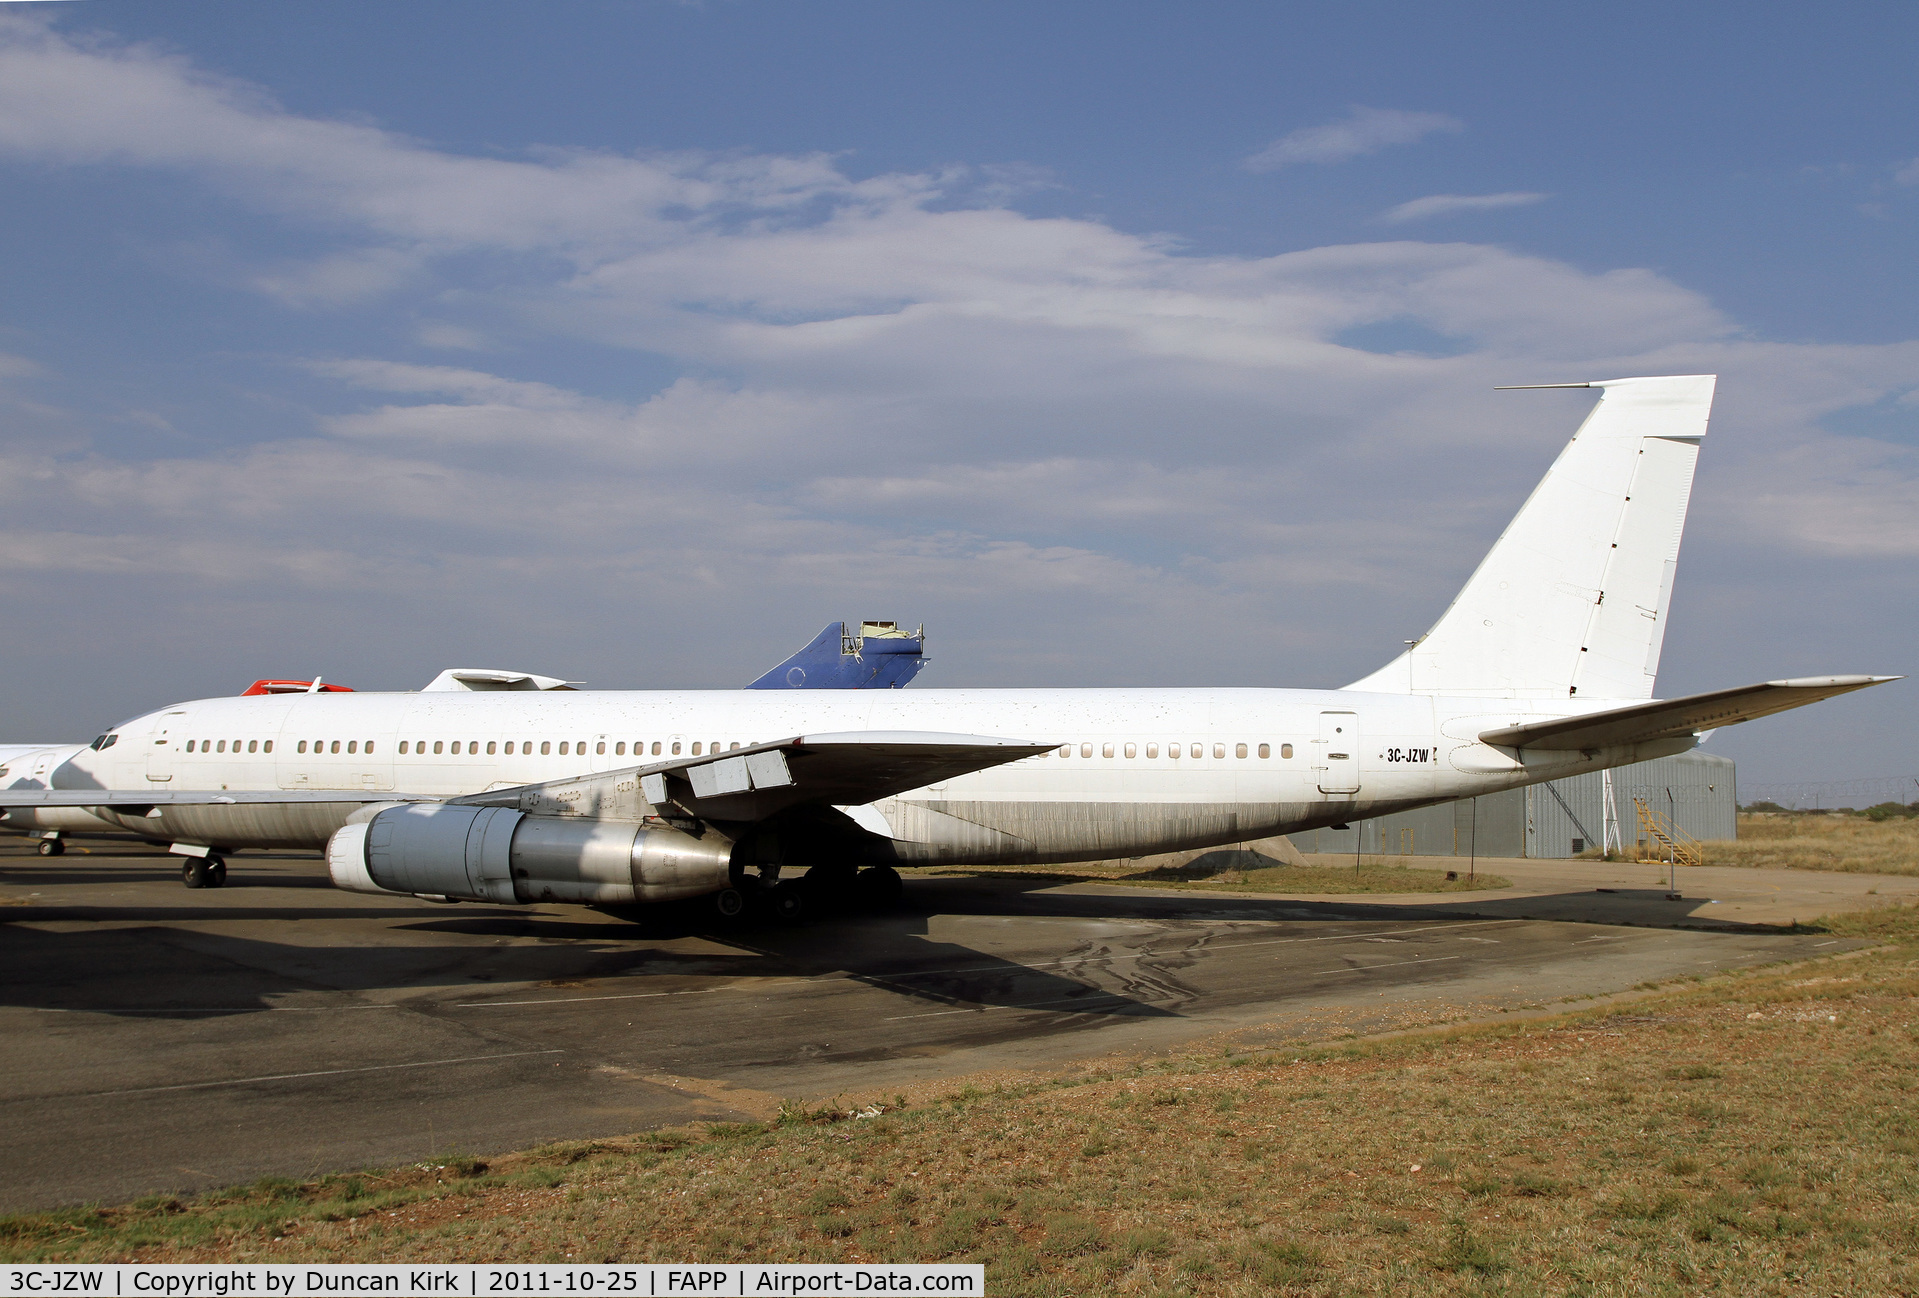 3C-JZW, 1964 Boeing 707-351C C/N 18747/369, Stored at Polokwane International, South Africa but probably to be scrapped